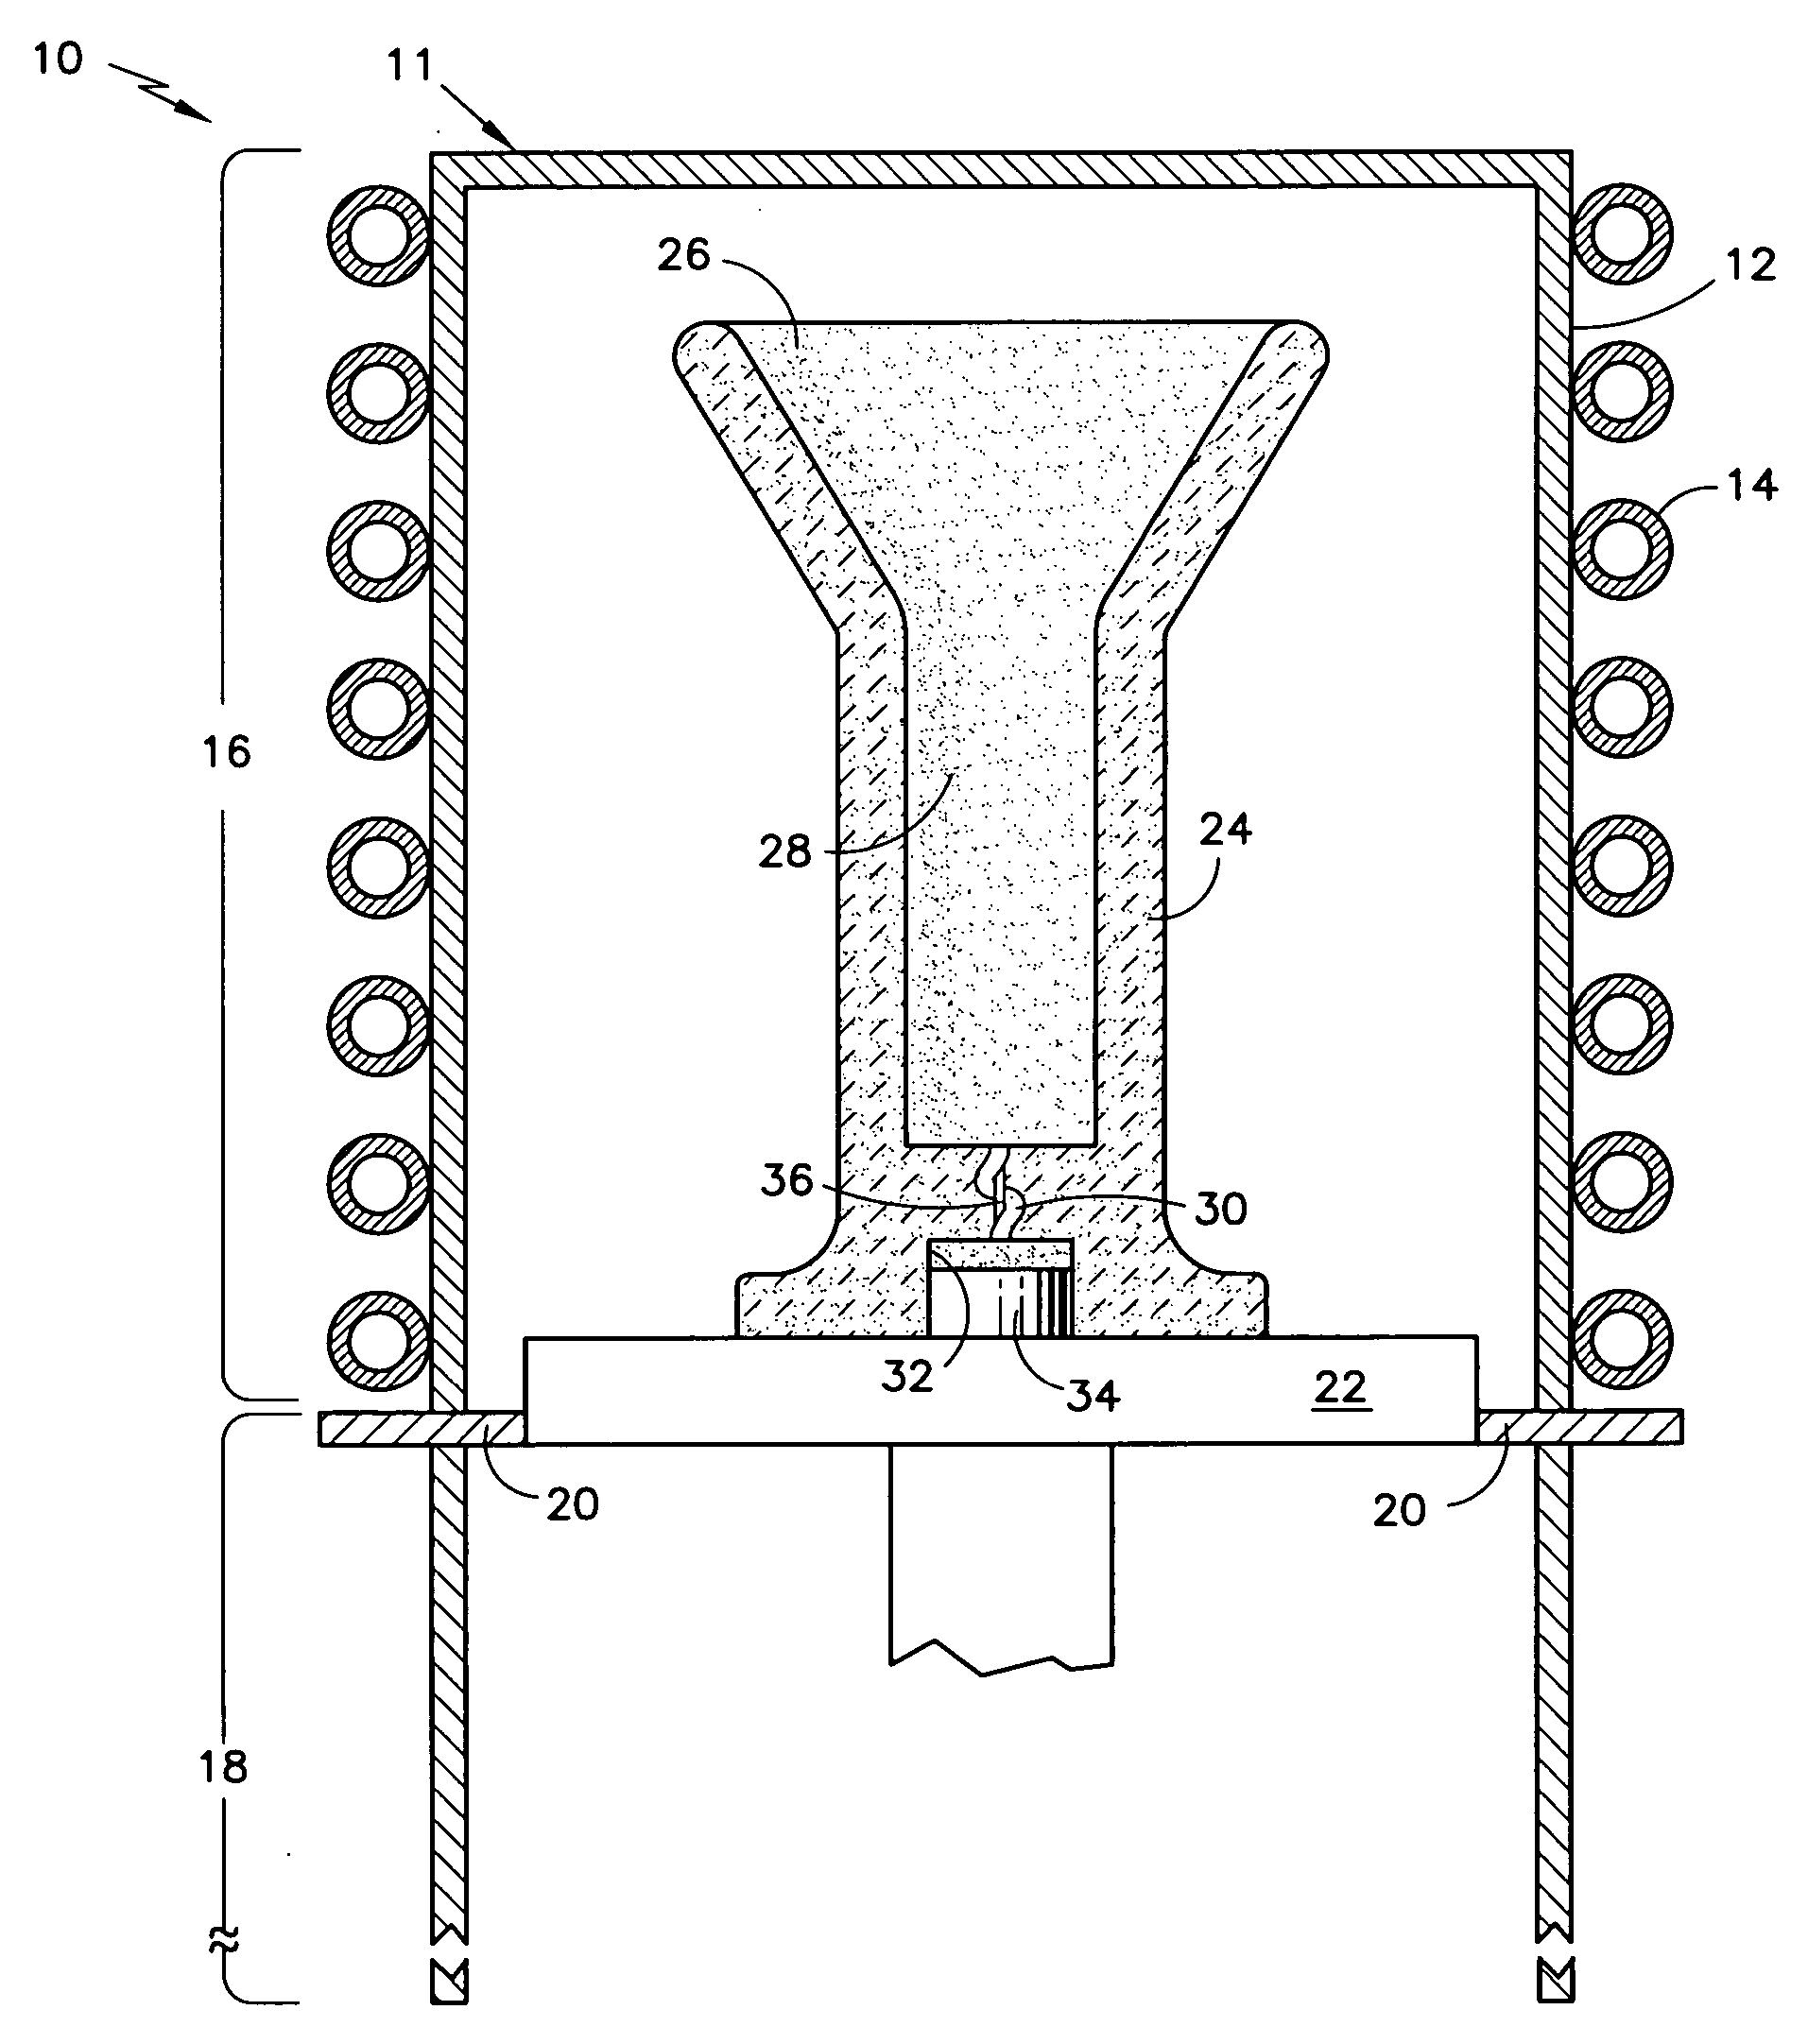 Single crystal investment cast components and methods of making same